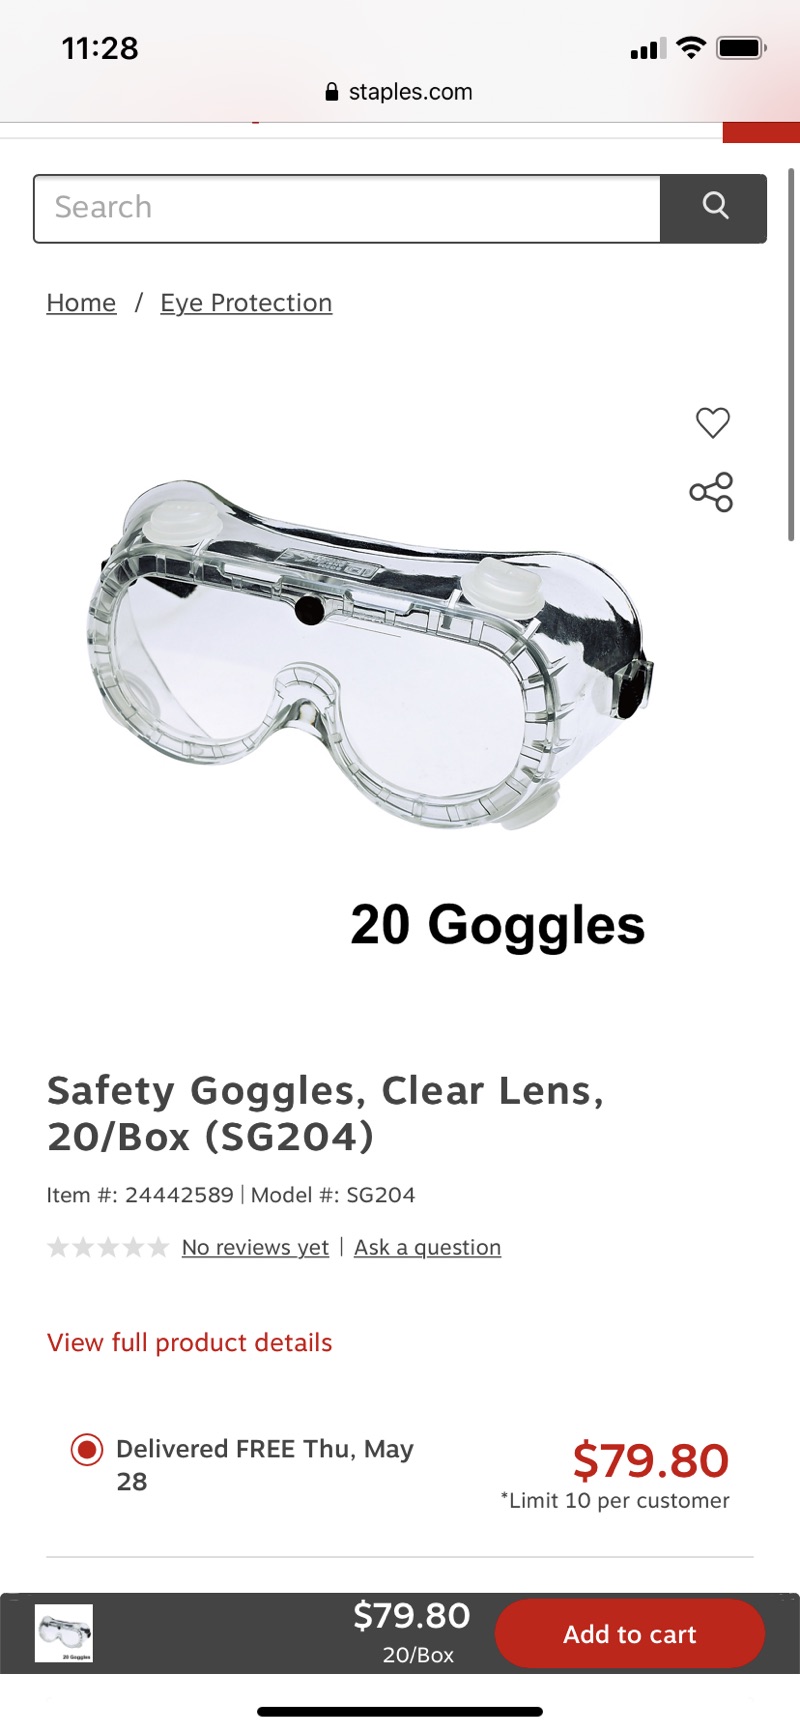 Shop Staples for Safety Goggles, Clear Lens, 20/Box (SG204)防护眼镜